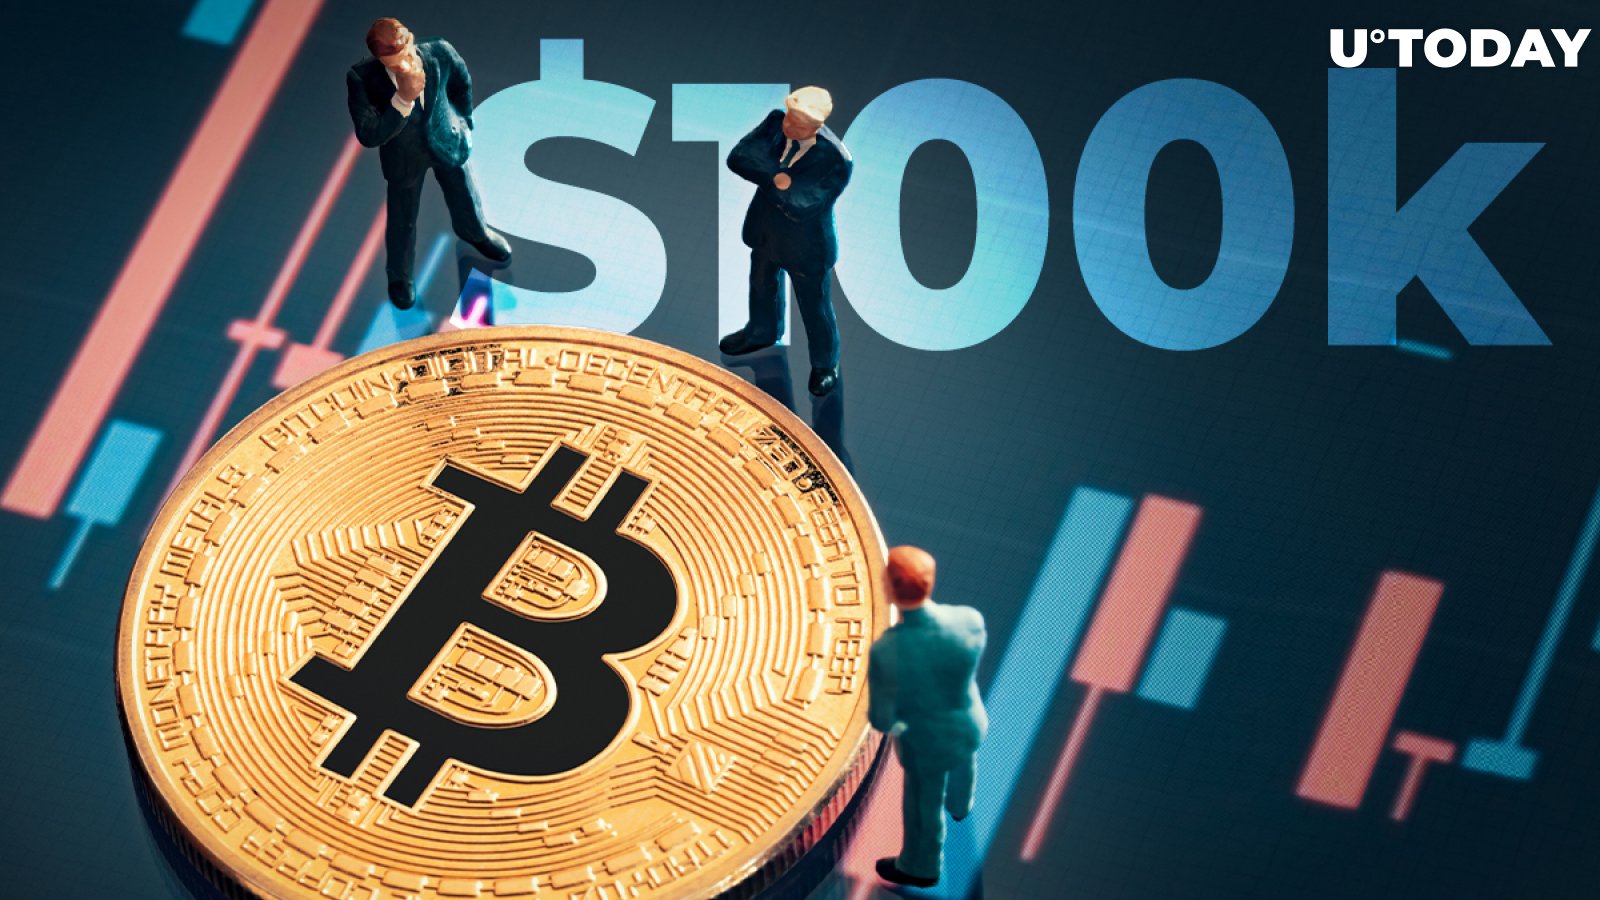 Bitcoin To Reach $100k? What’s In Store For Bitcoin In 2021?